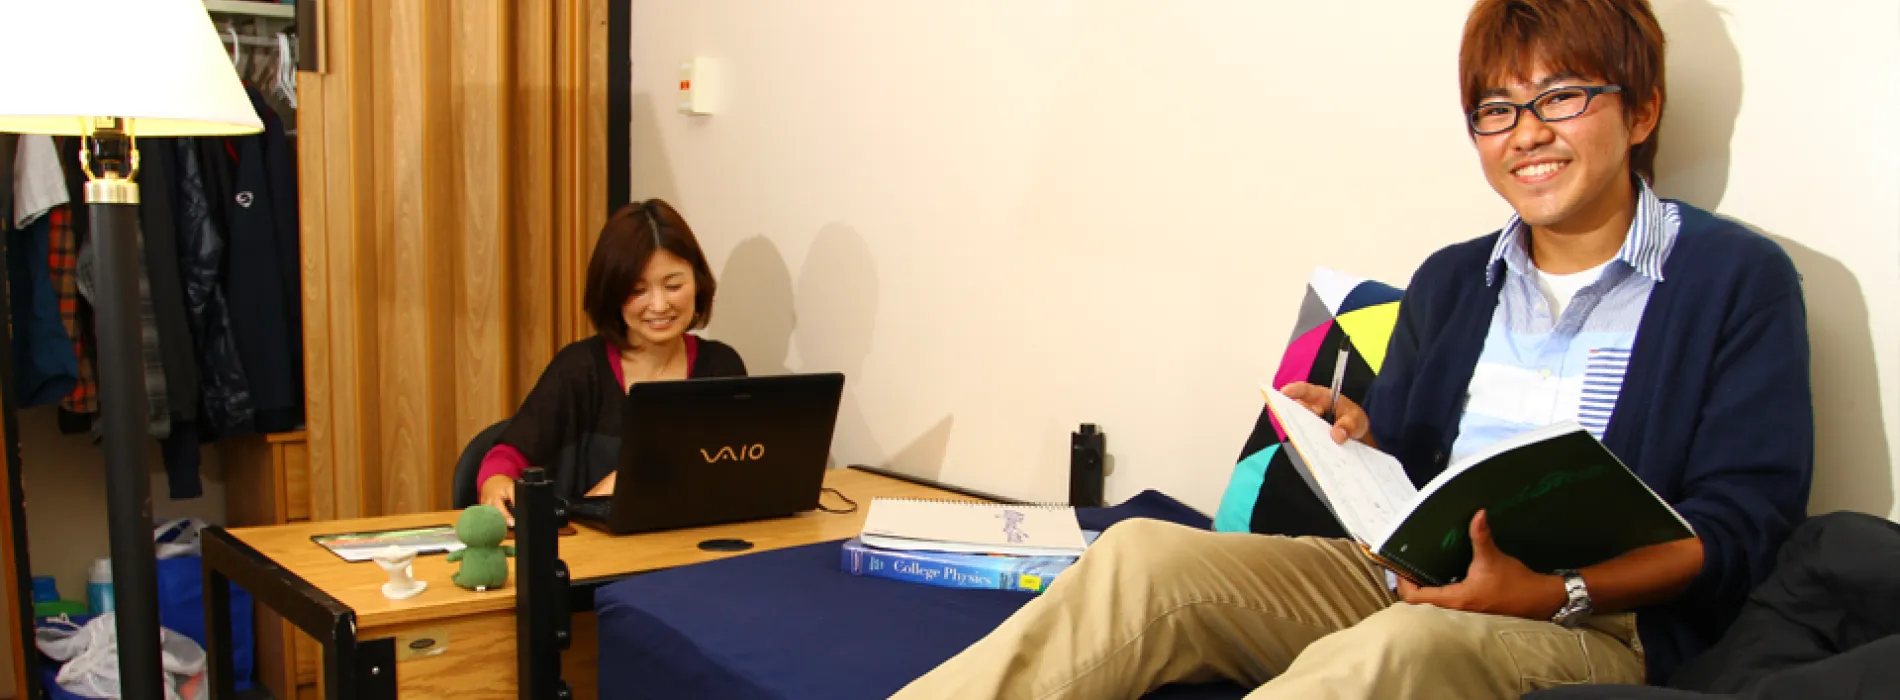 female student sitting at a desk and male student sitting on a bed in residence hall